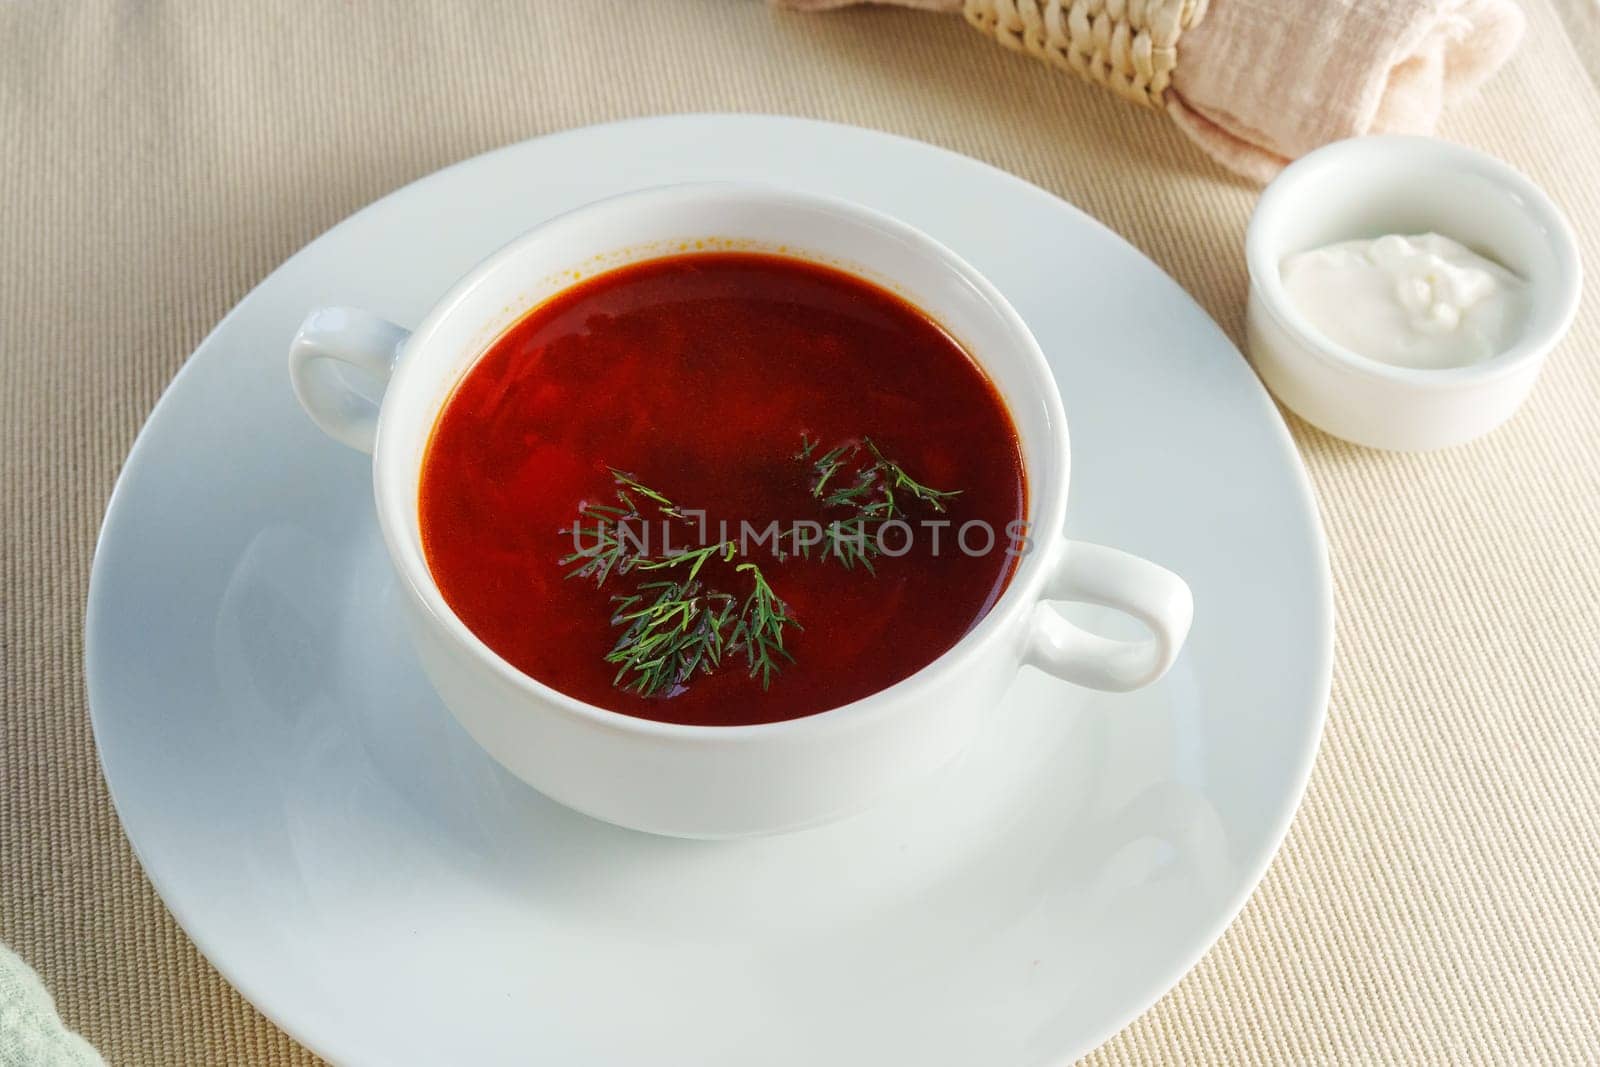 Serenity in a Bowl: Captivating Creamy Tomato Bisque Served With a Gleaming Silver Spoon